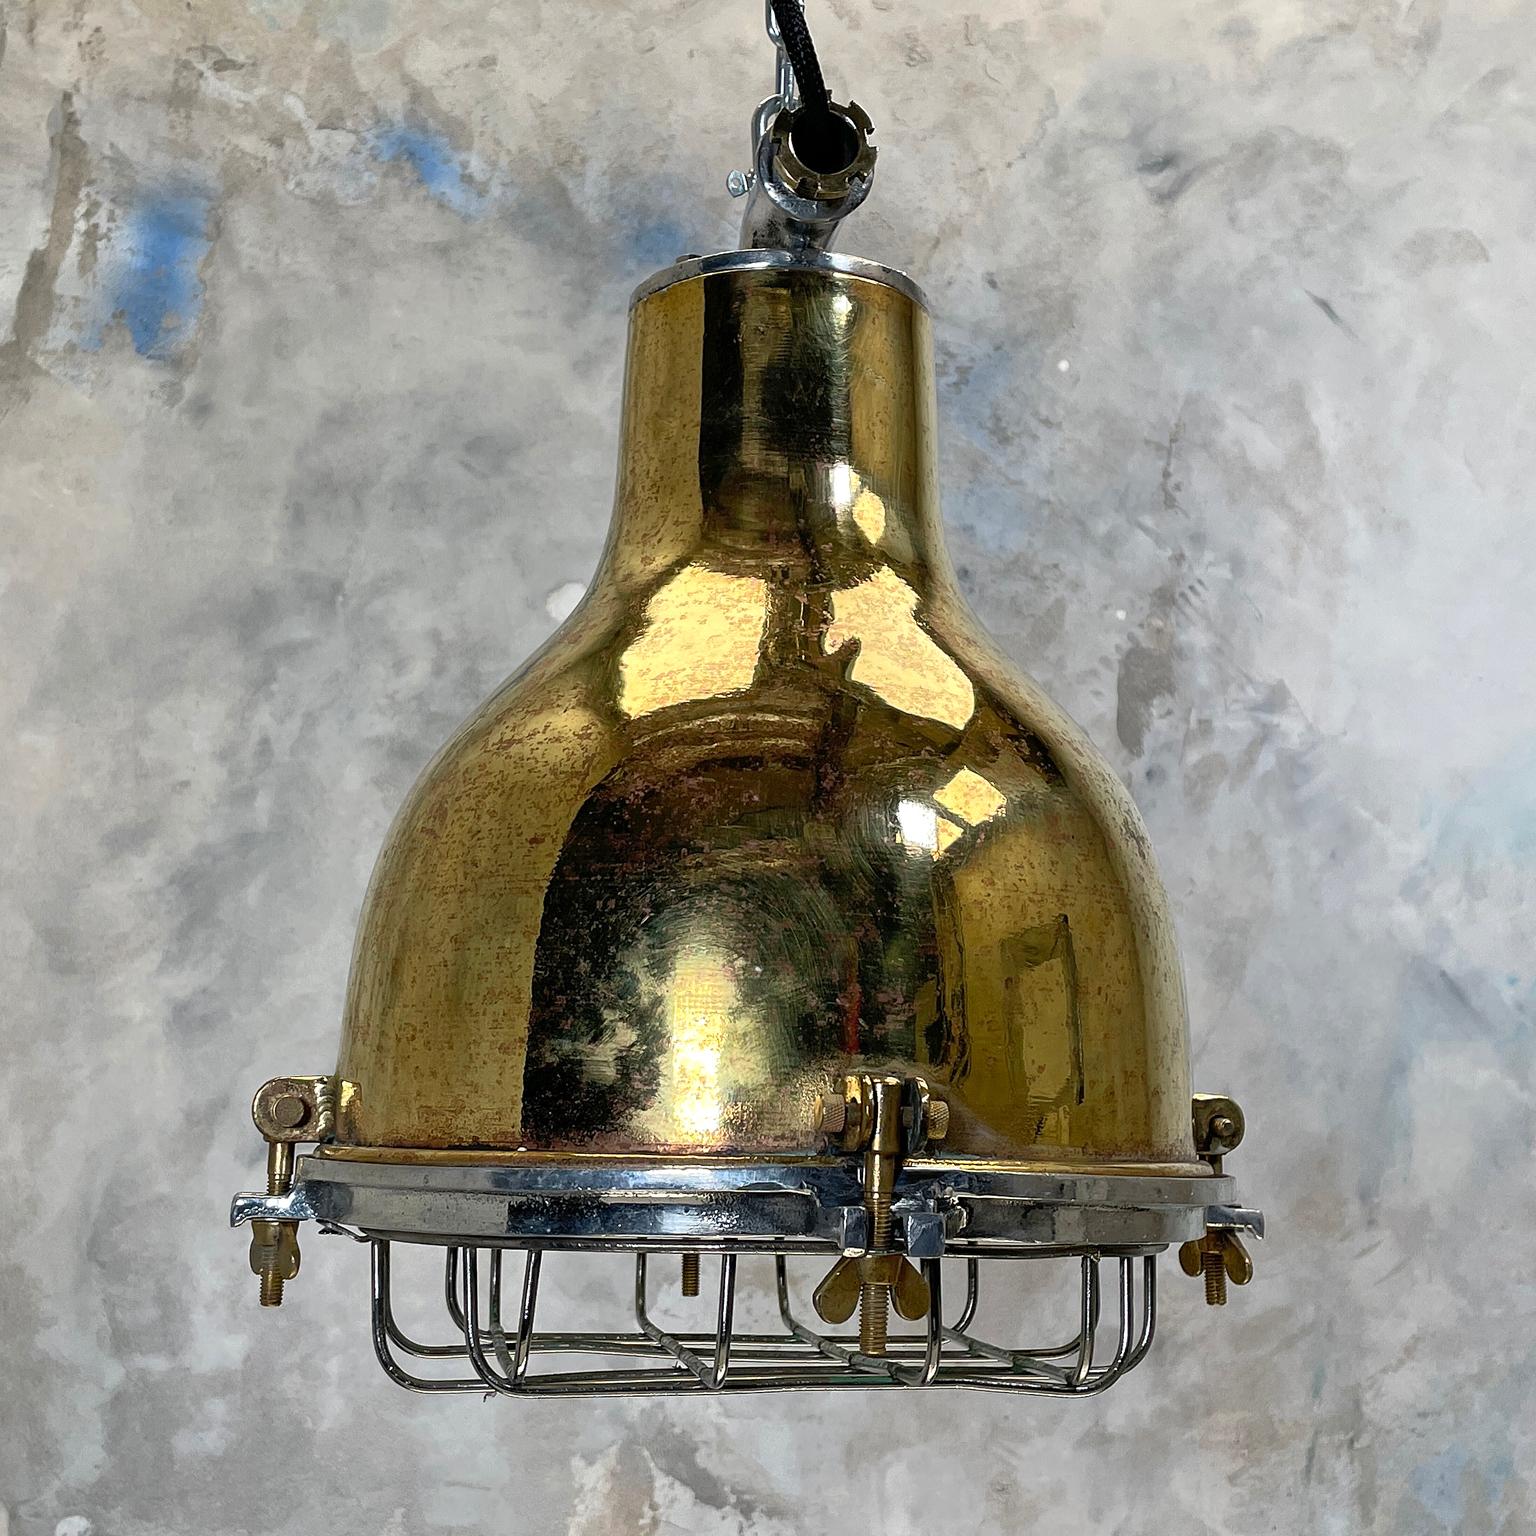 A vintage brass marine industrial ceiling pendant light with cage originating from Japan made in the 1980's. Reclaimed and professionally restored to modern lighting standards and ready for contemporary interiors.

Specifications
Width: